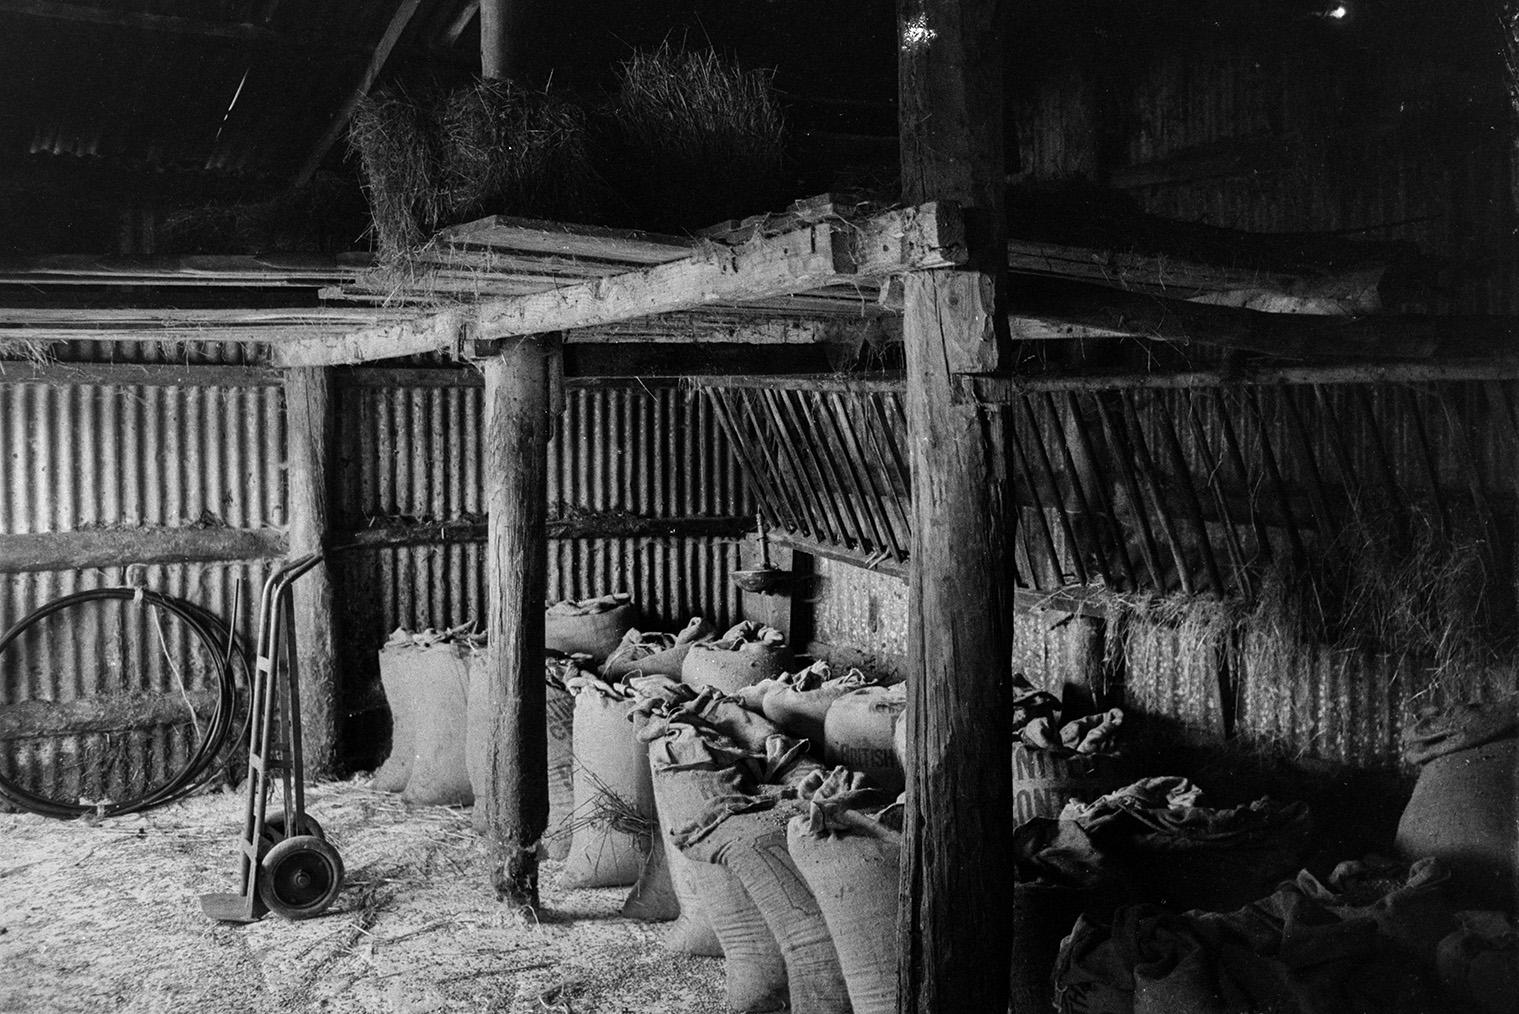 A sack truck and sacks, possibly filled with grain, in a corrugated iron barn at Mill Road Farm, Beaford. Hay bales can be seen in the tallet of the barn. The farm was also known as Jeffrys.